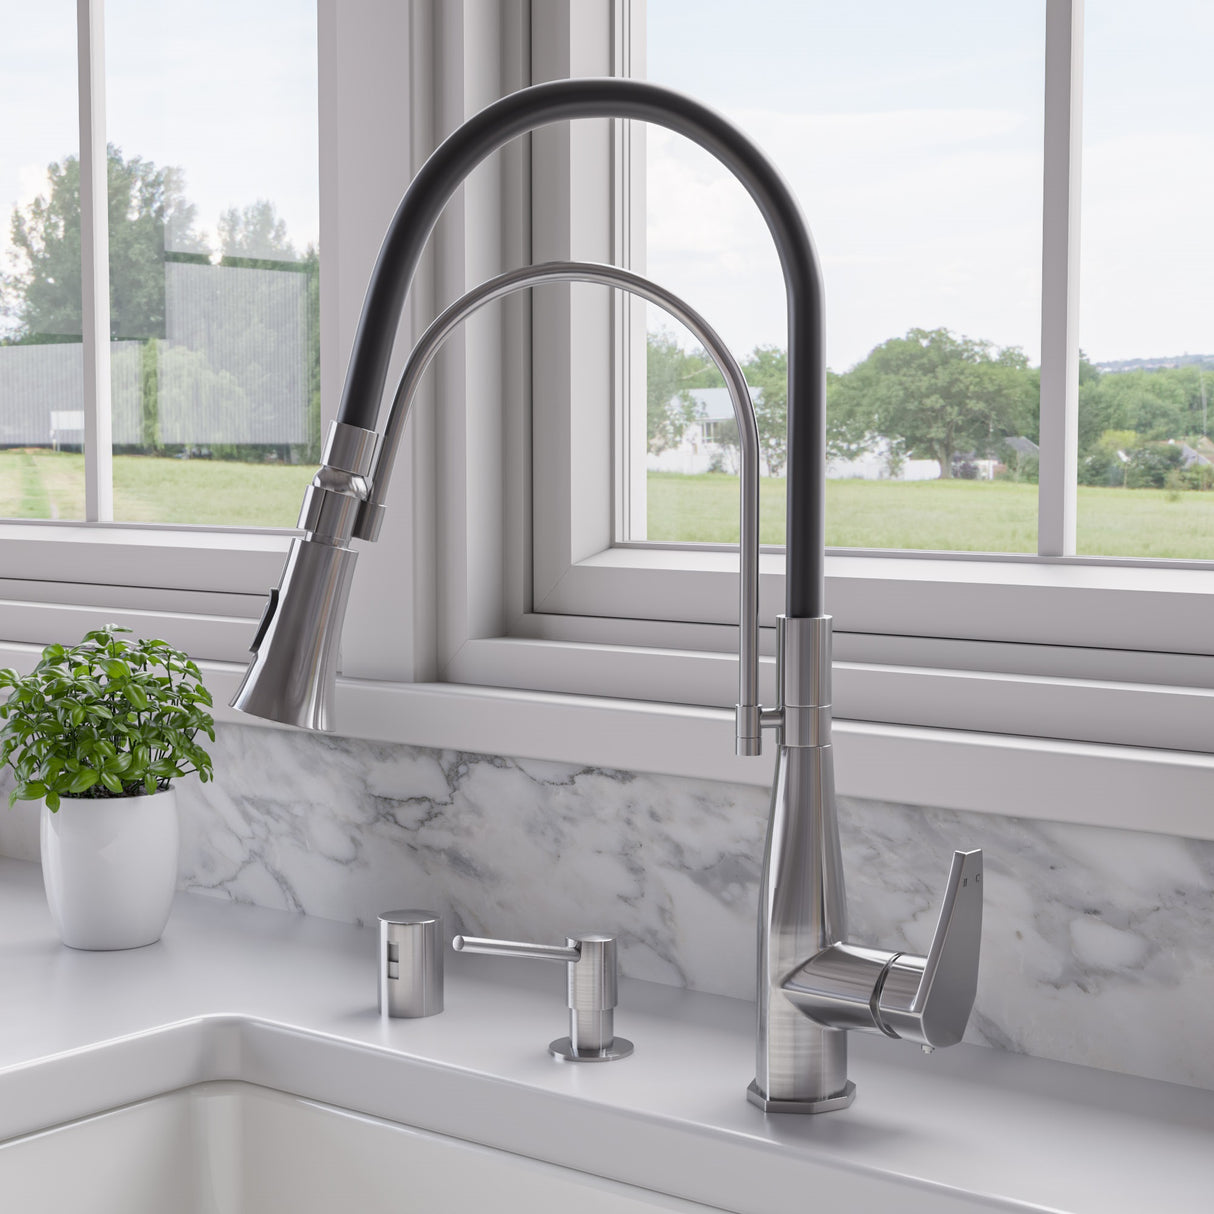 Brushed Nickel Kitchen Faucet with Black Rubber Stem